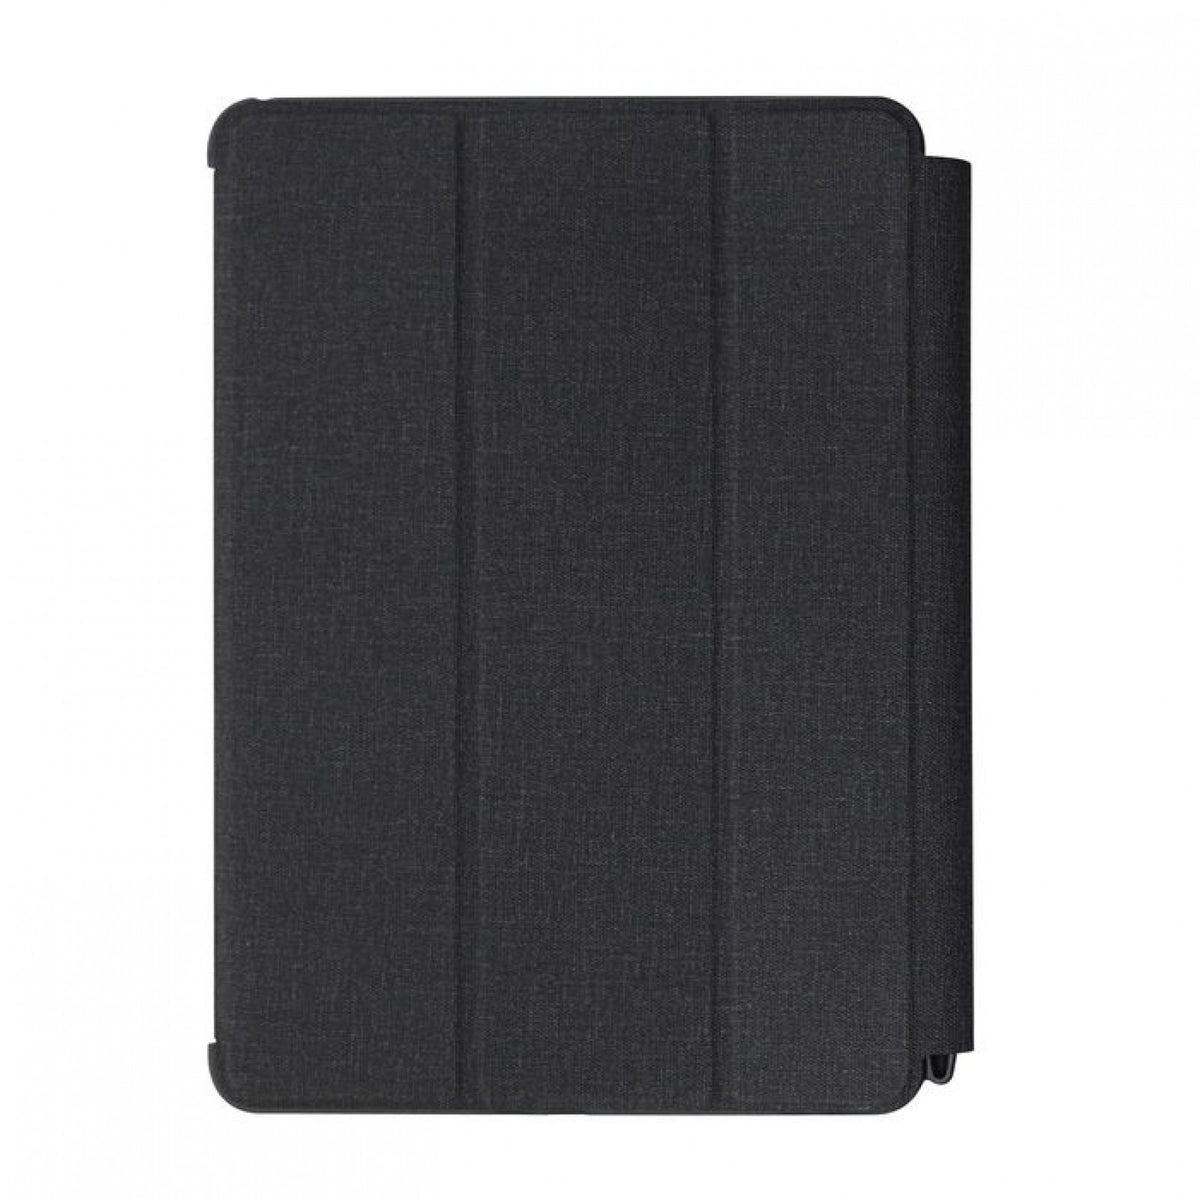 QDOS Muse Case for iPad 10.2-inch - Space Grey - iStore Namibia